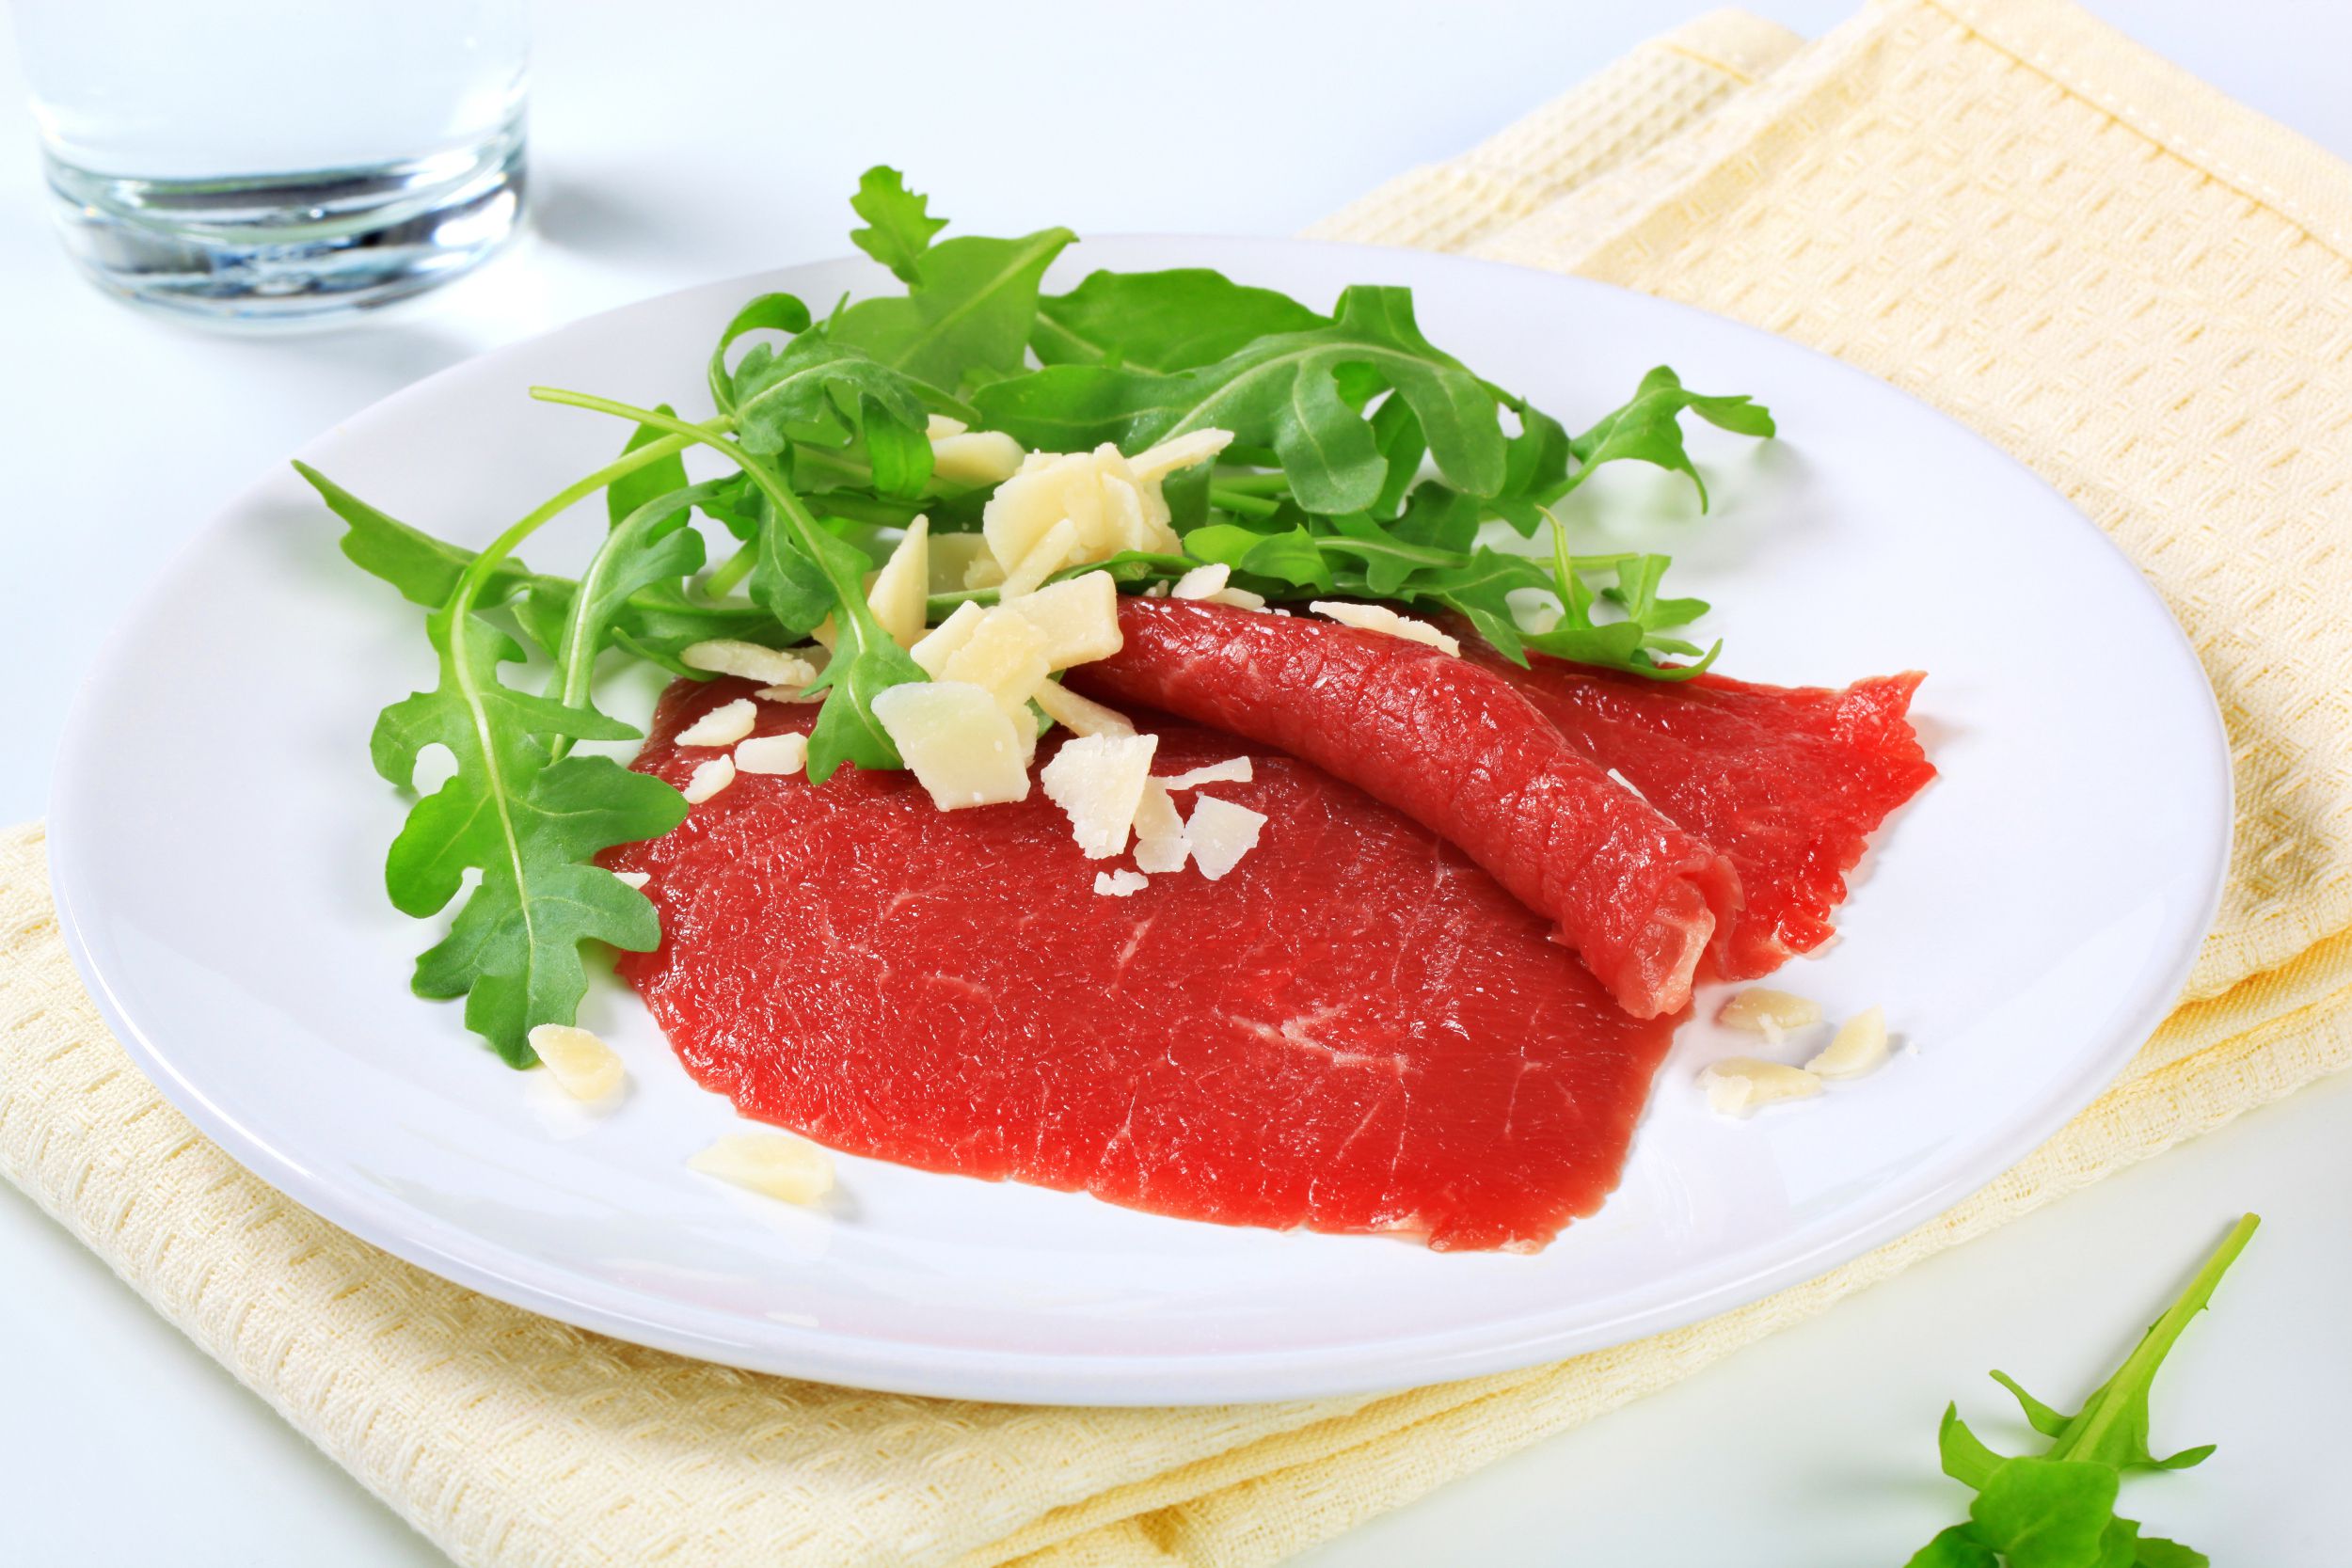 What Is Carpaccio and How Is It Served?